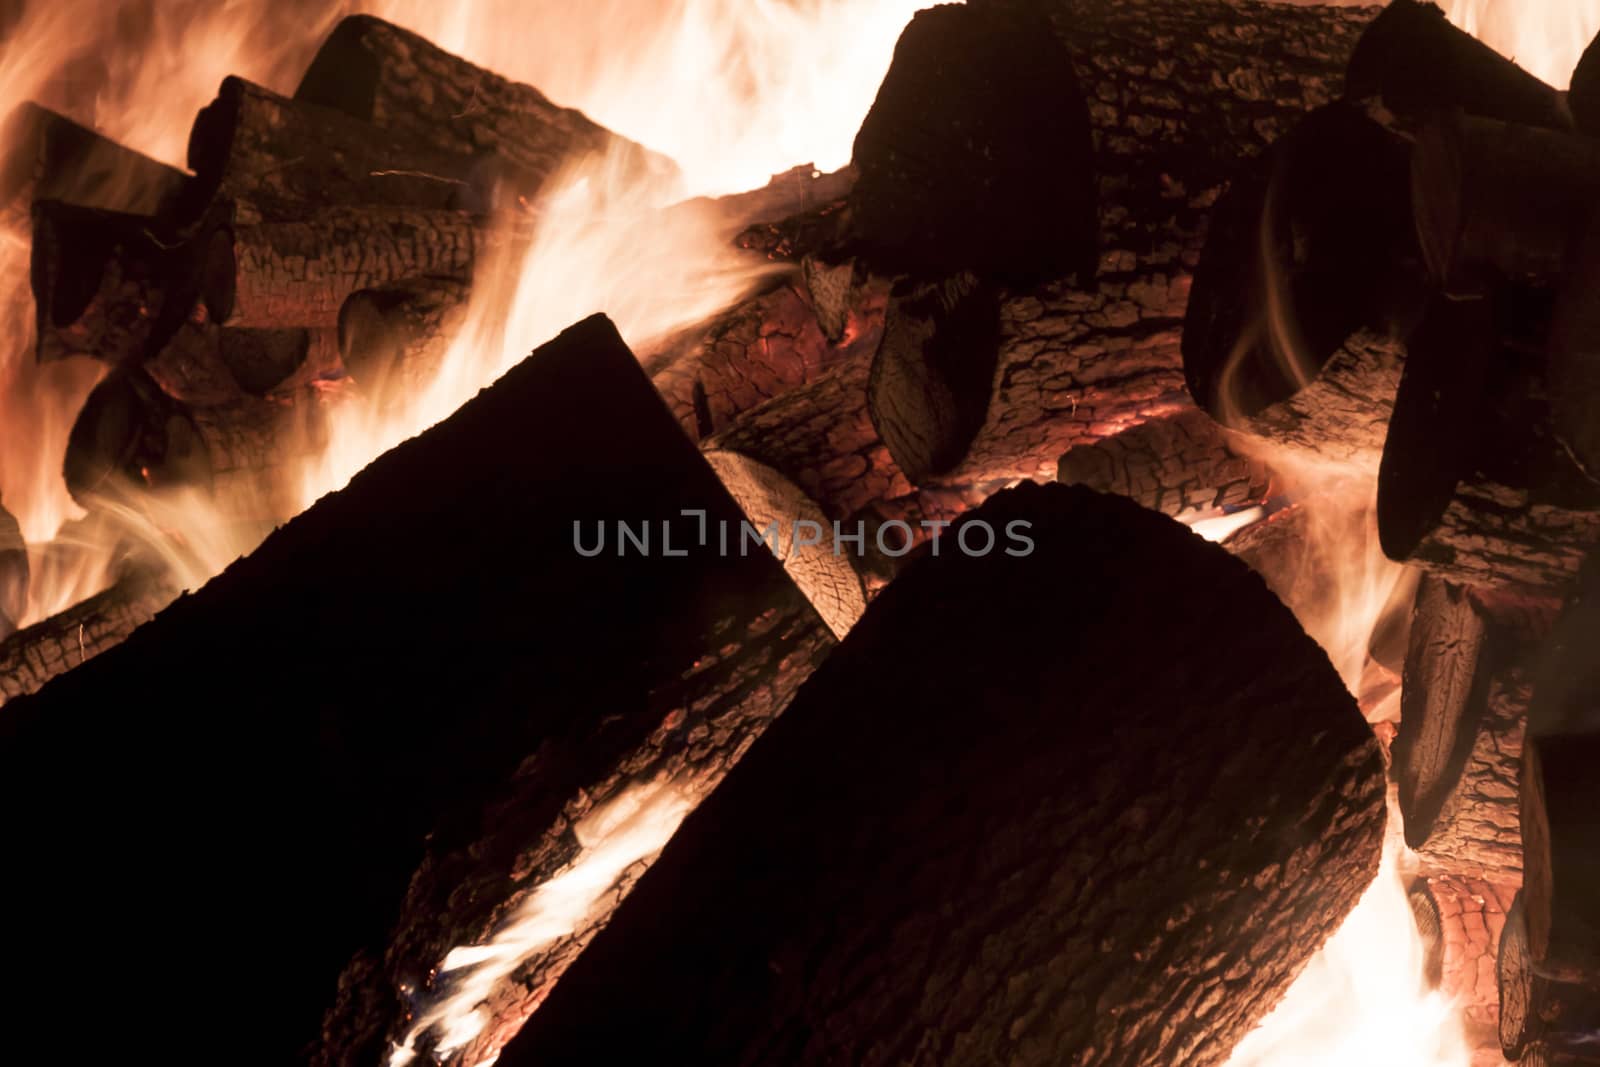 Fire from wood in industrial stove - Poland.